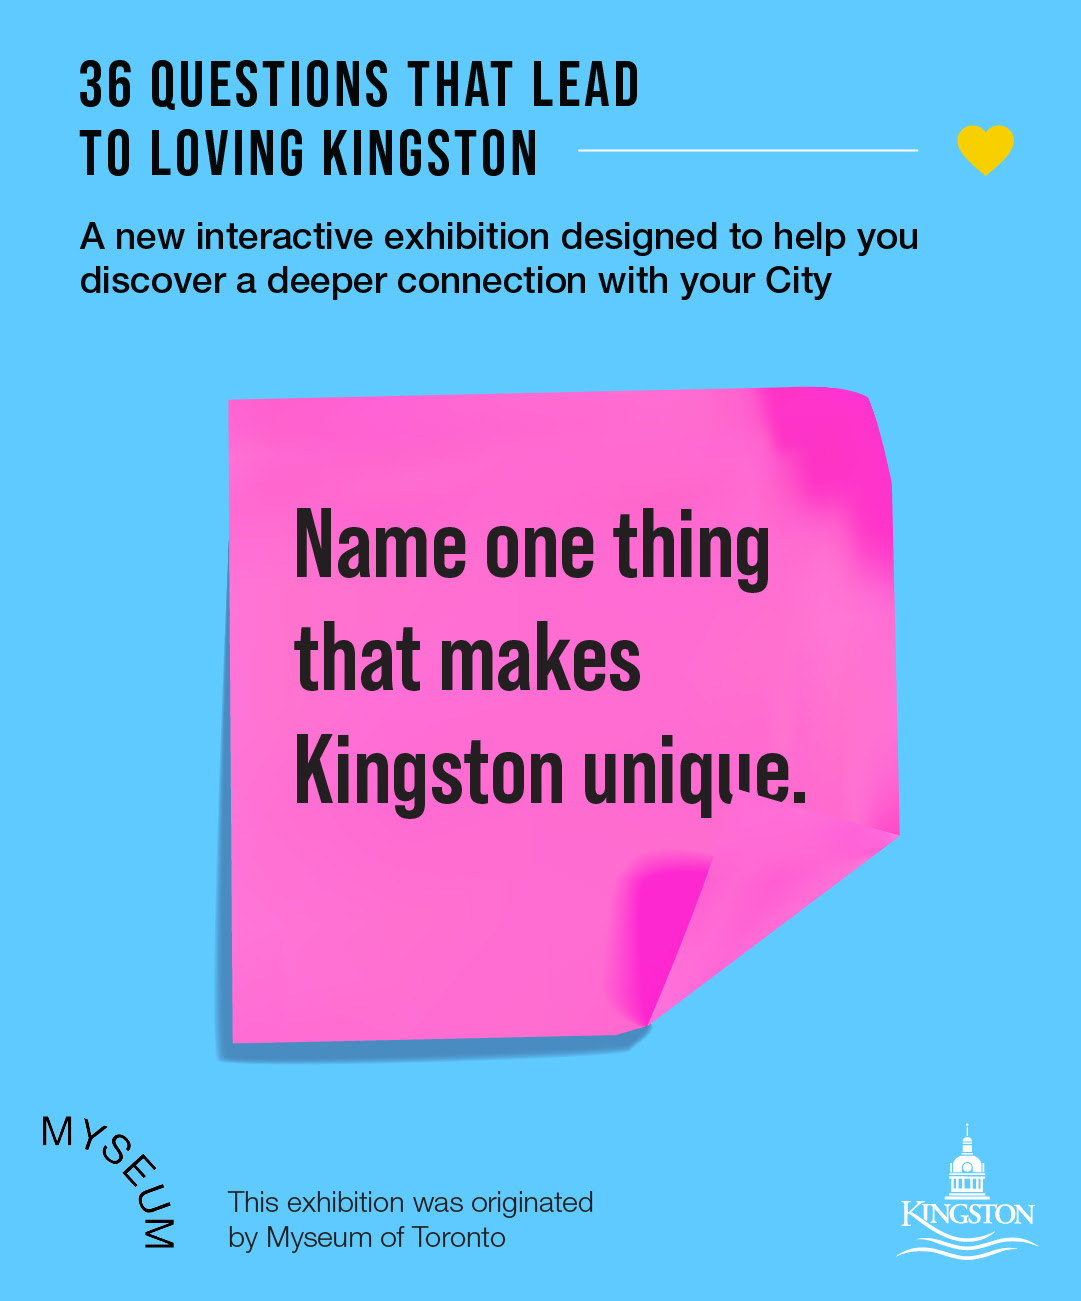 36 questions that lead to loving Kingston. A new interactive exhibition designed to help you discover a deeper connection with your city. Text on a pink sticky note reads: Name one thing that makes Kingston unique. This exhibition was originated by Myseum of Toronto.